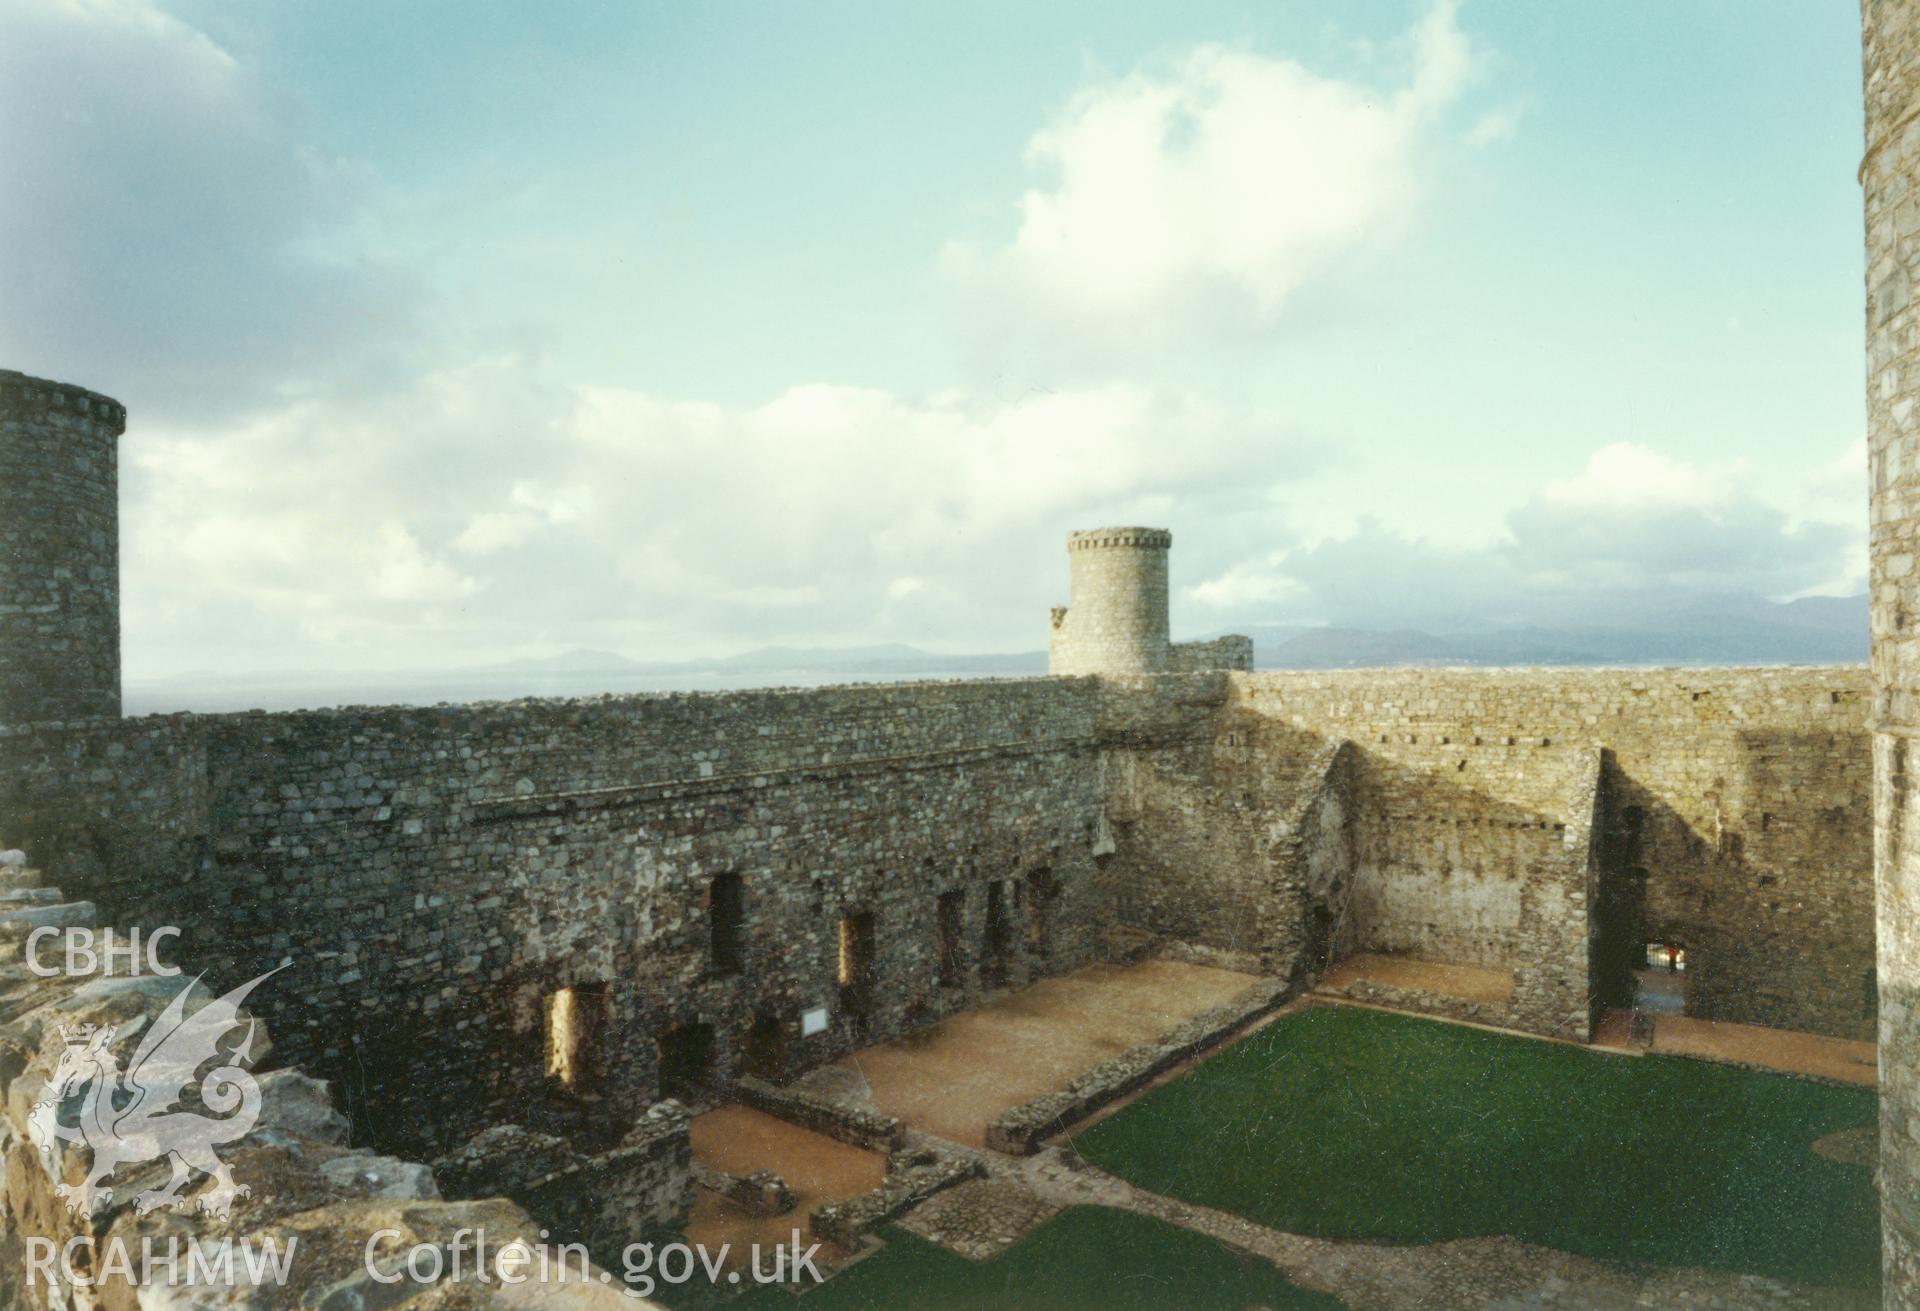 1 of a set of 27 colour prints: print showing view of Harlech Castle, collated by the former Central Office of Information.